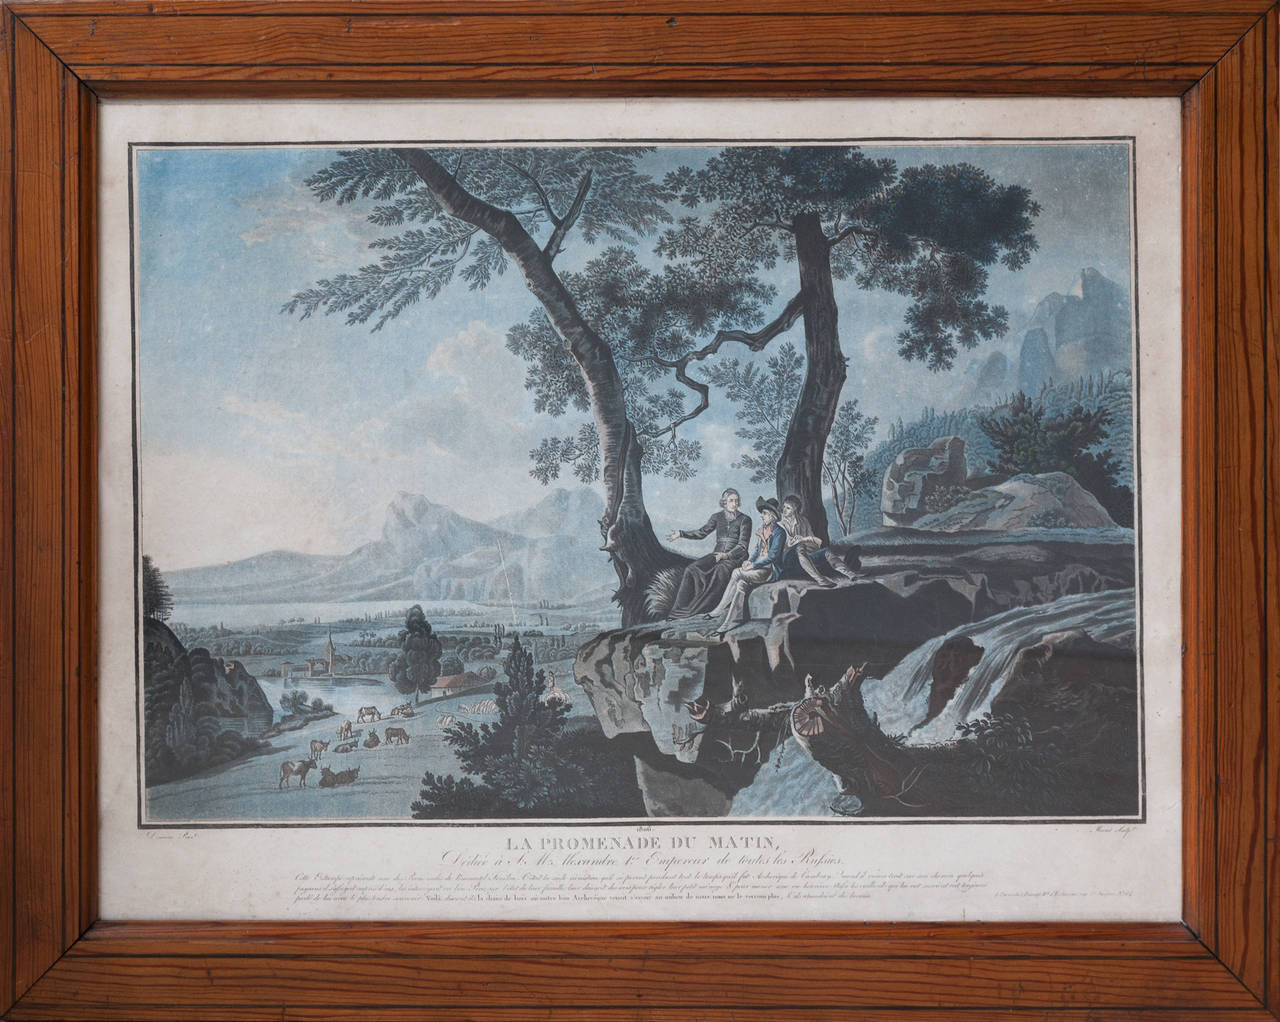 La promenade du matin and La promenade du soir, engraved by Pierre Michel Alix. Framed in 19th century pitch pine frames.
France, 1806. The image with a preparatory blue wash, original colour. Some small scuff marks, see photographs.